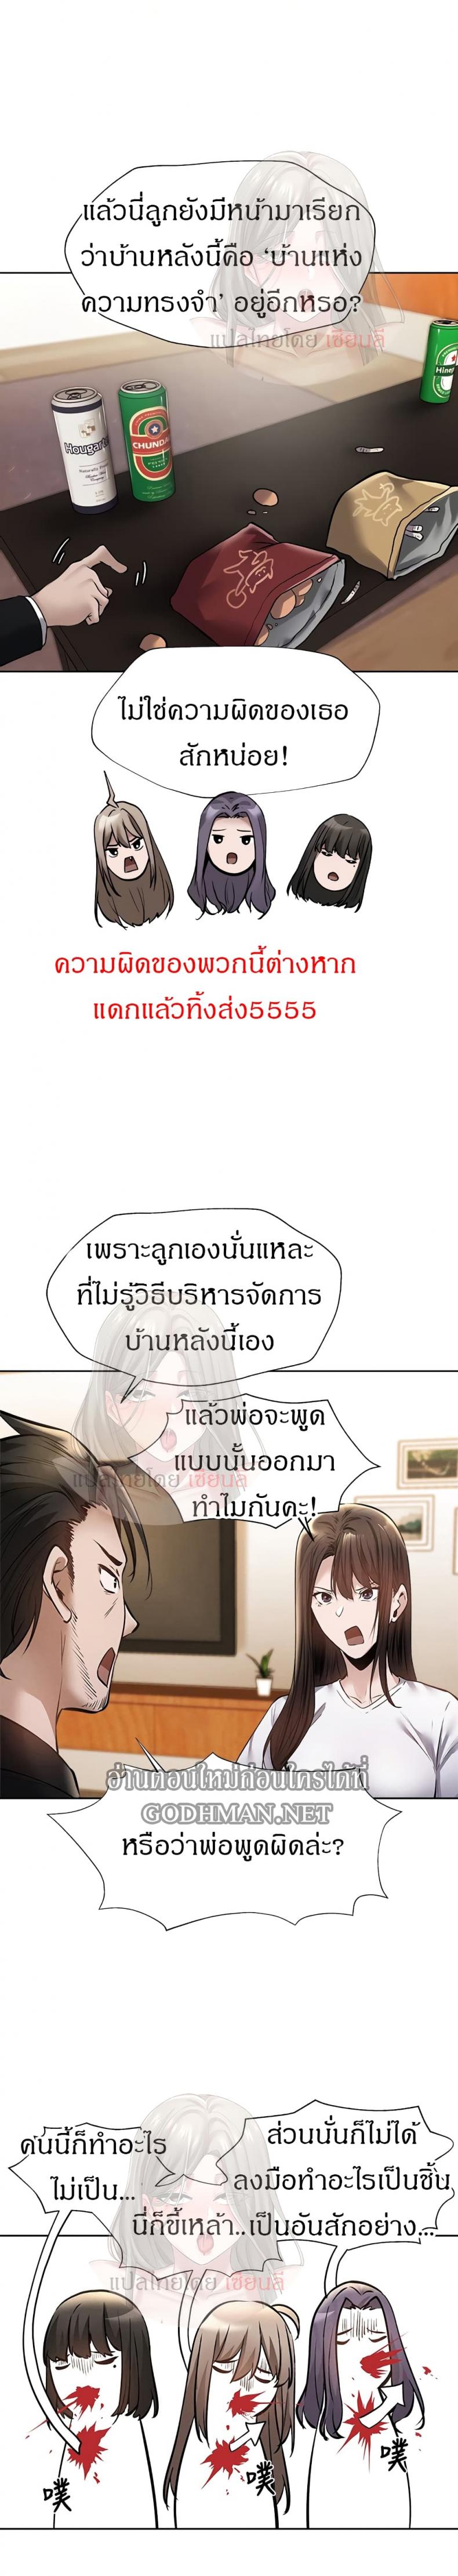 Is There an Empty Room? 63 ภาพที่ 14